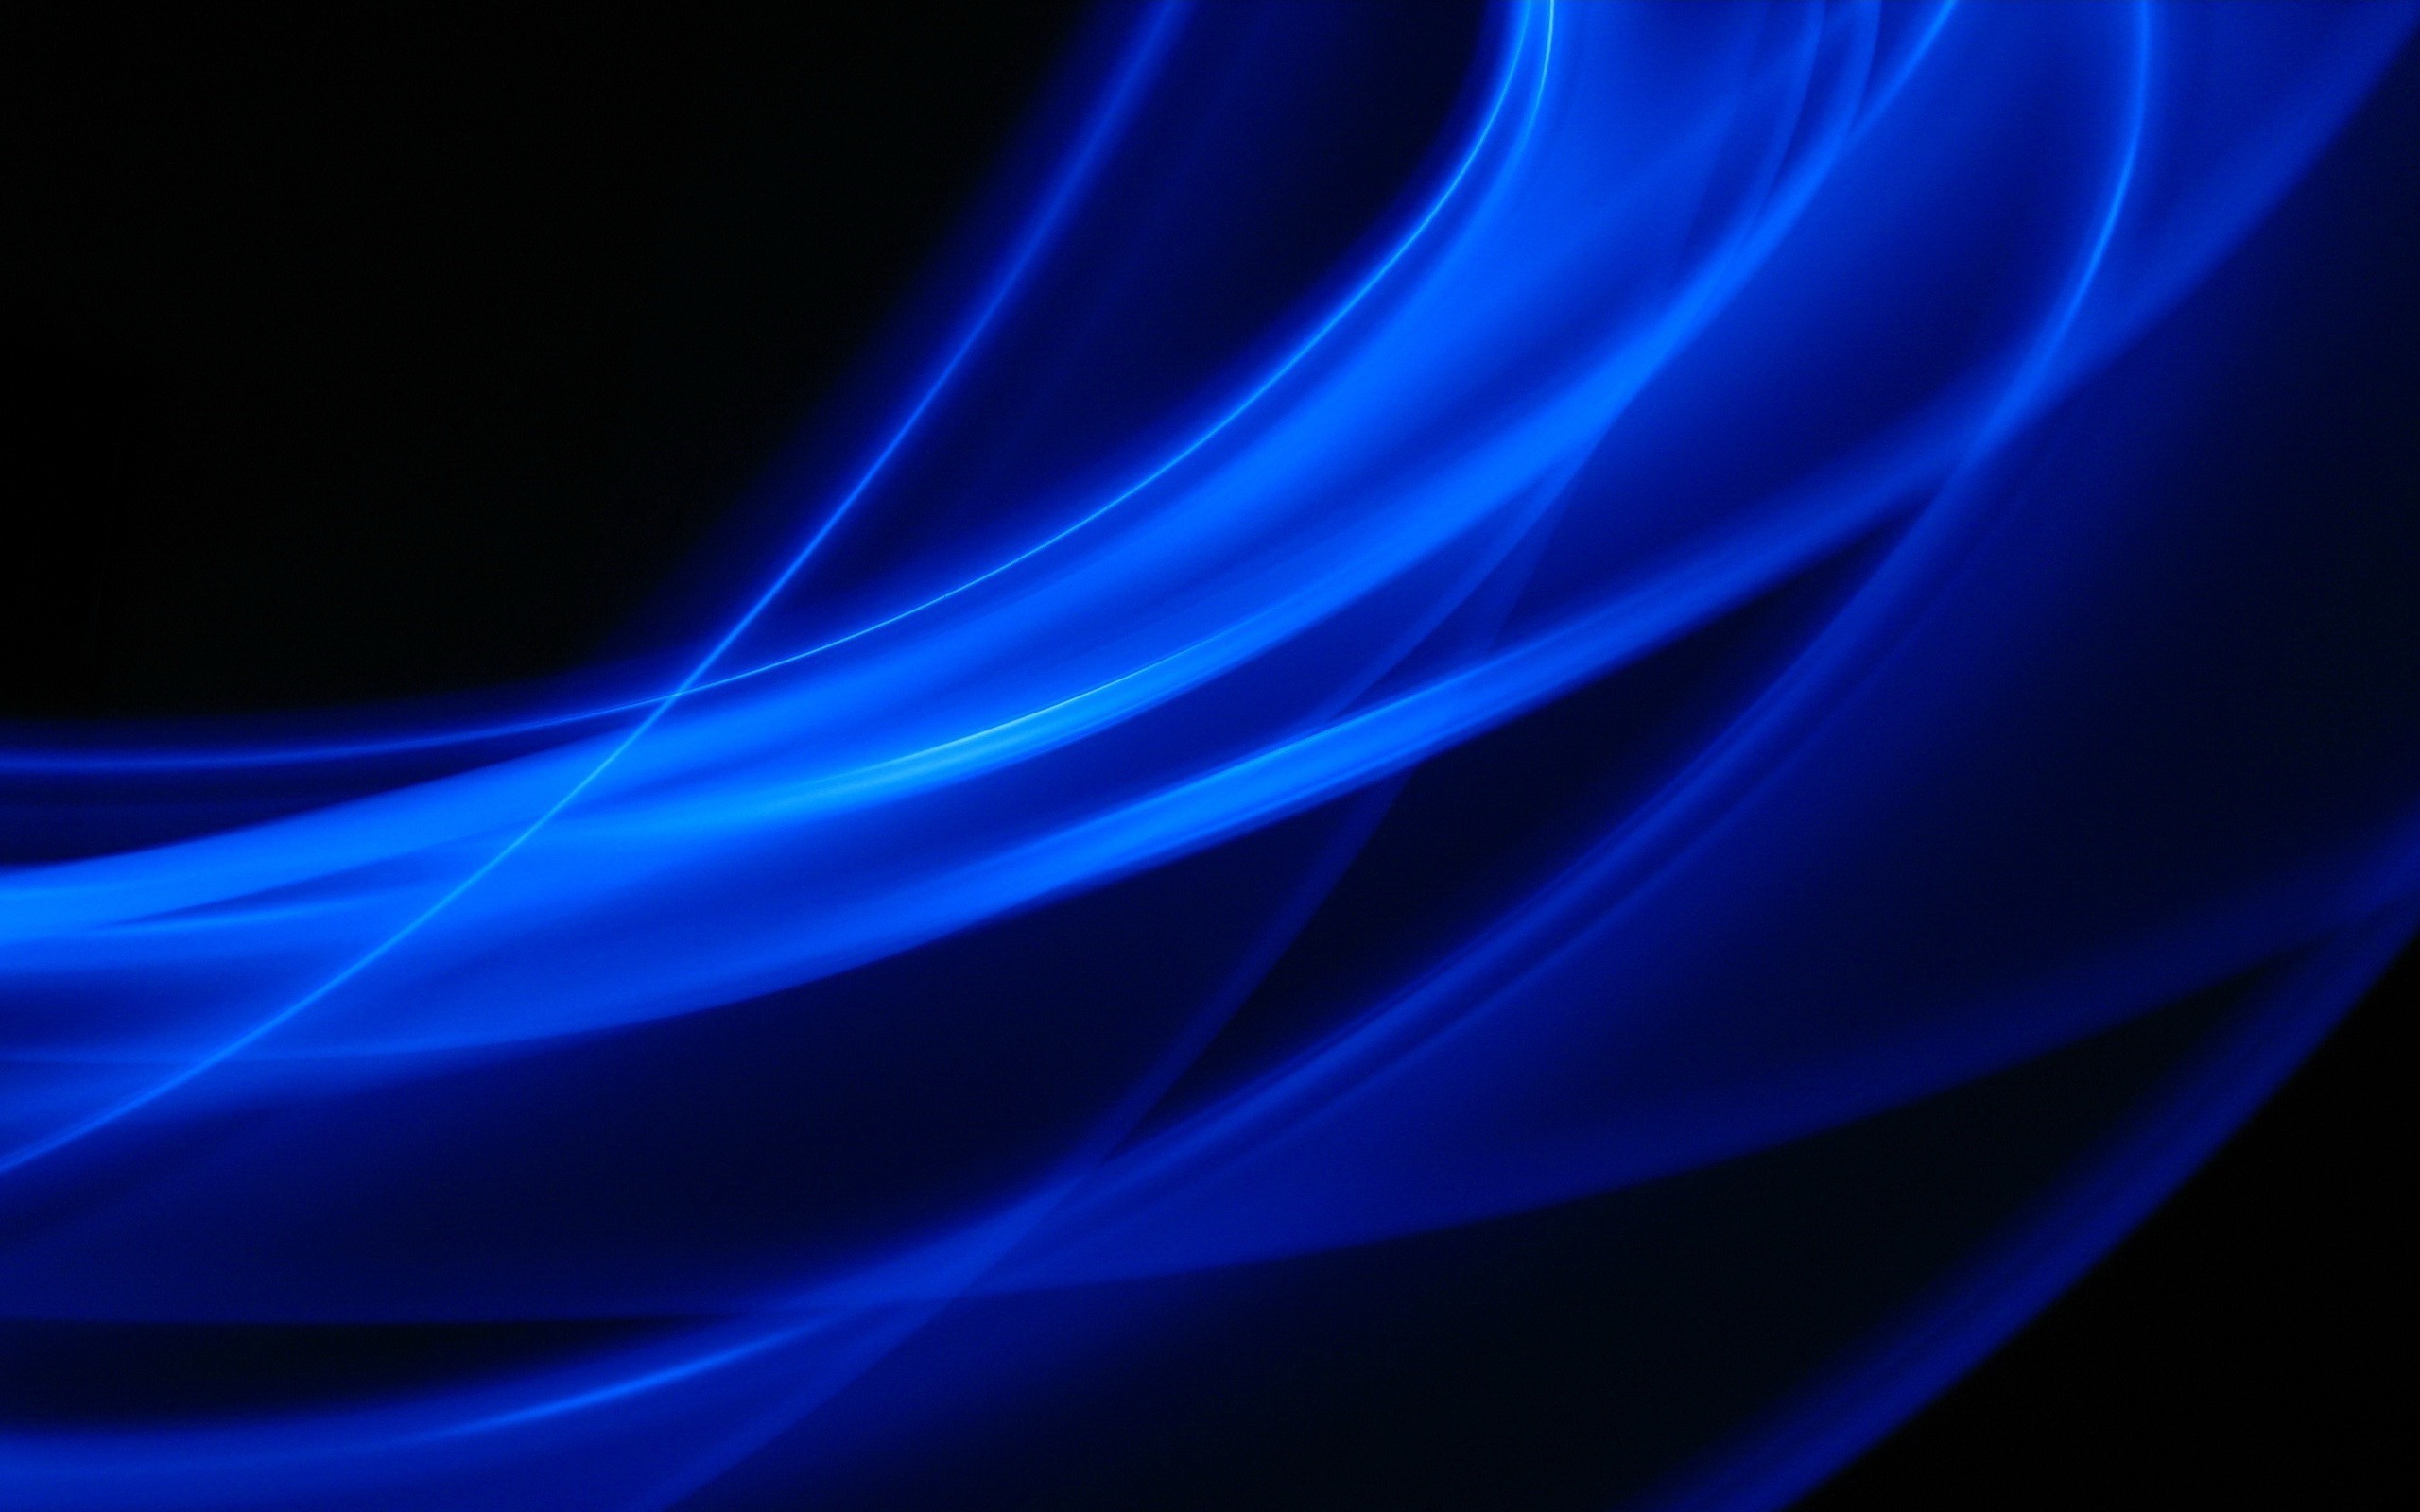 Blue Abstract Windows 81 Wallpapers All for Windows 10 Free